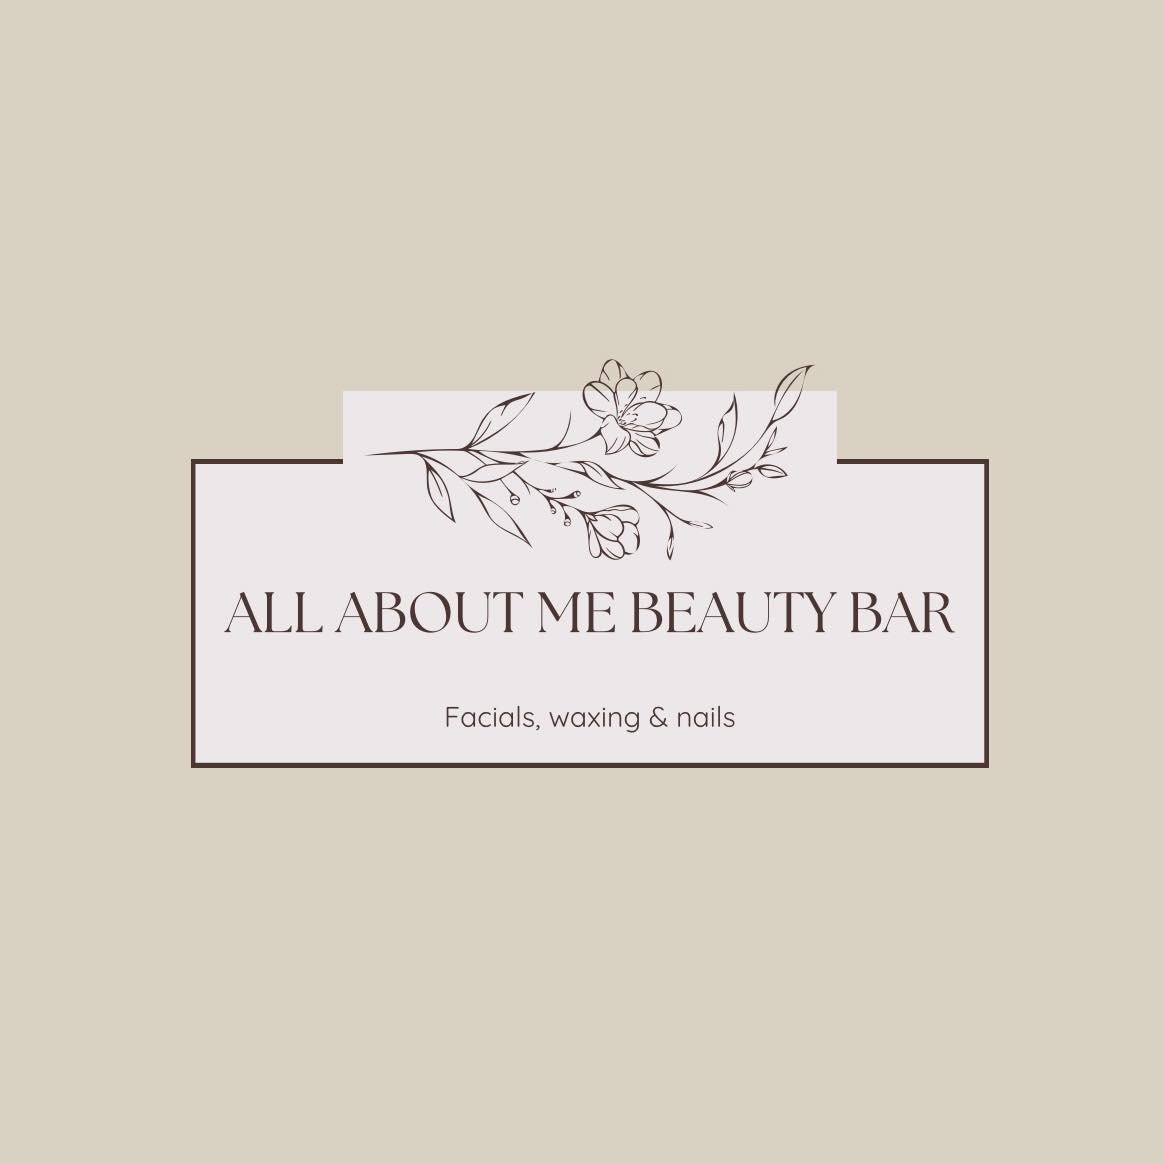 All About Me Beauty Bar